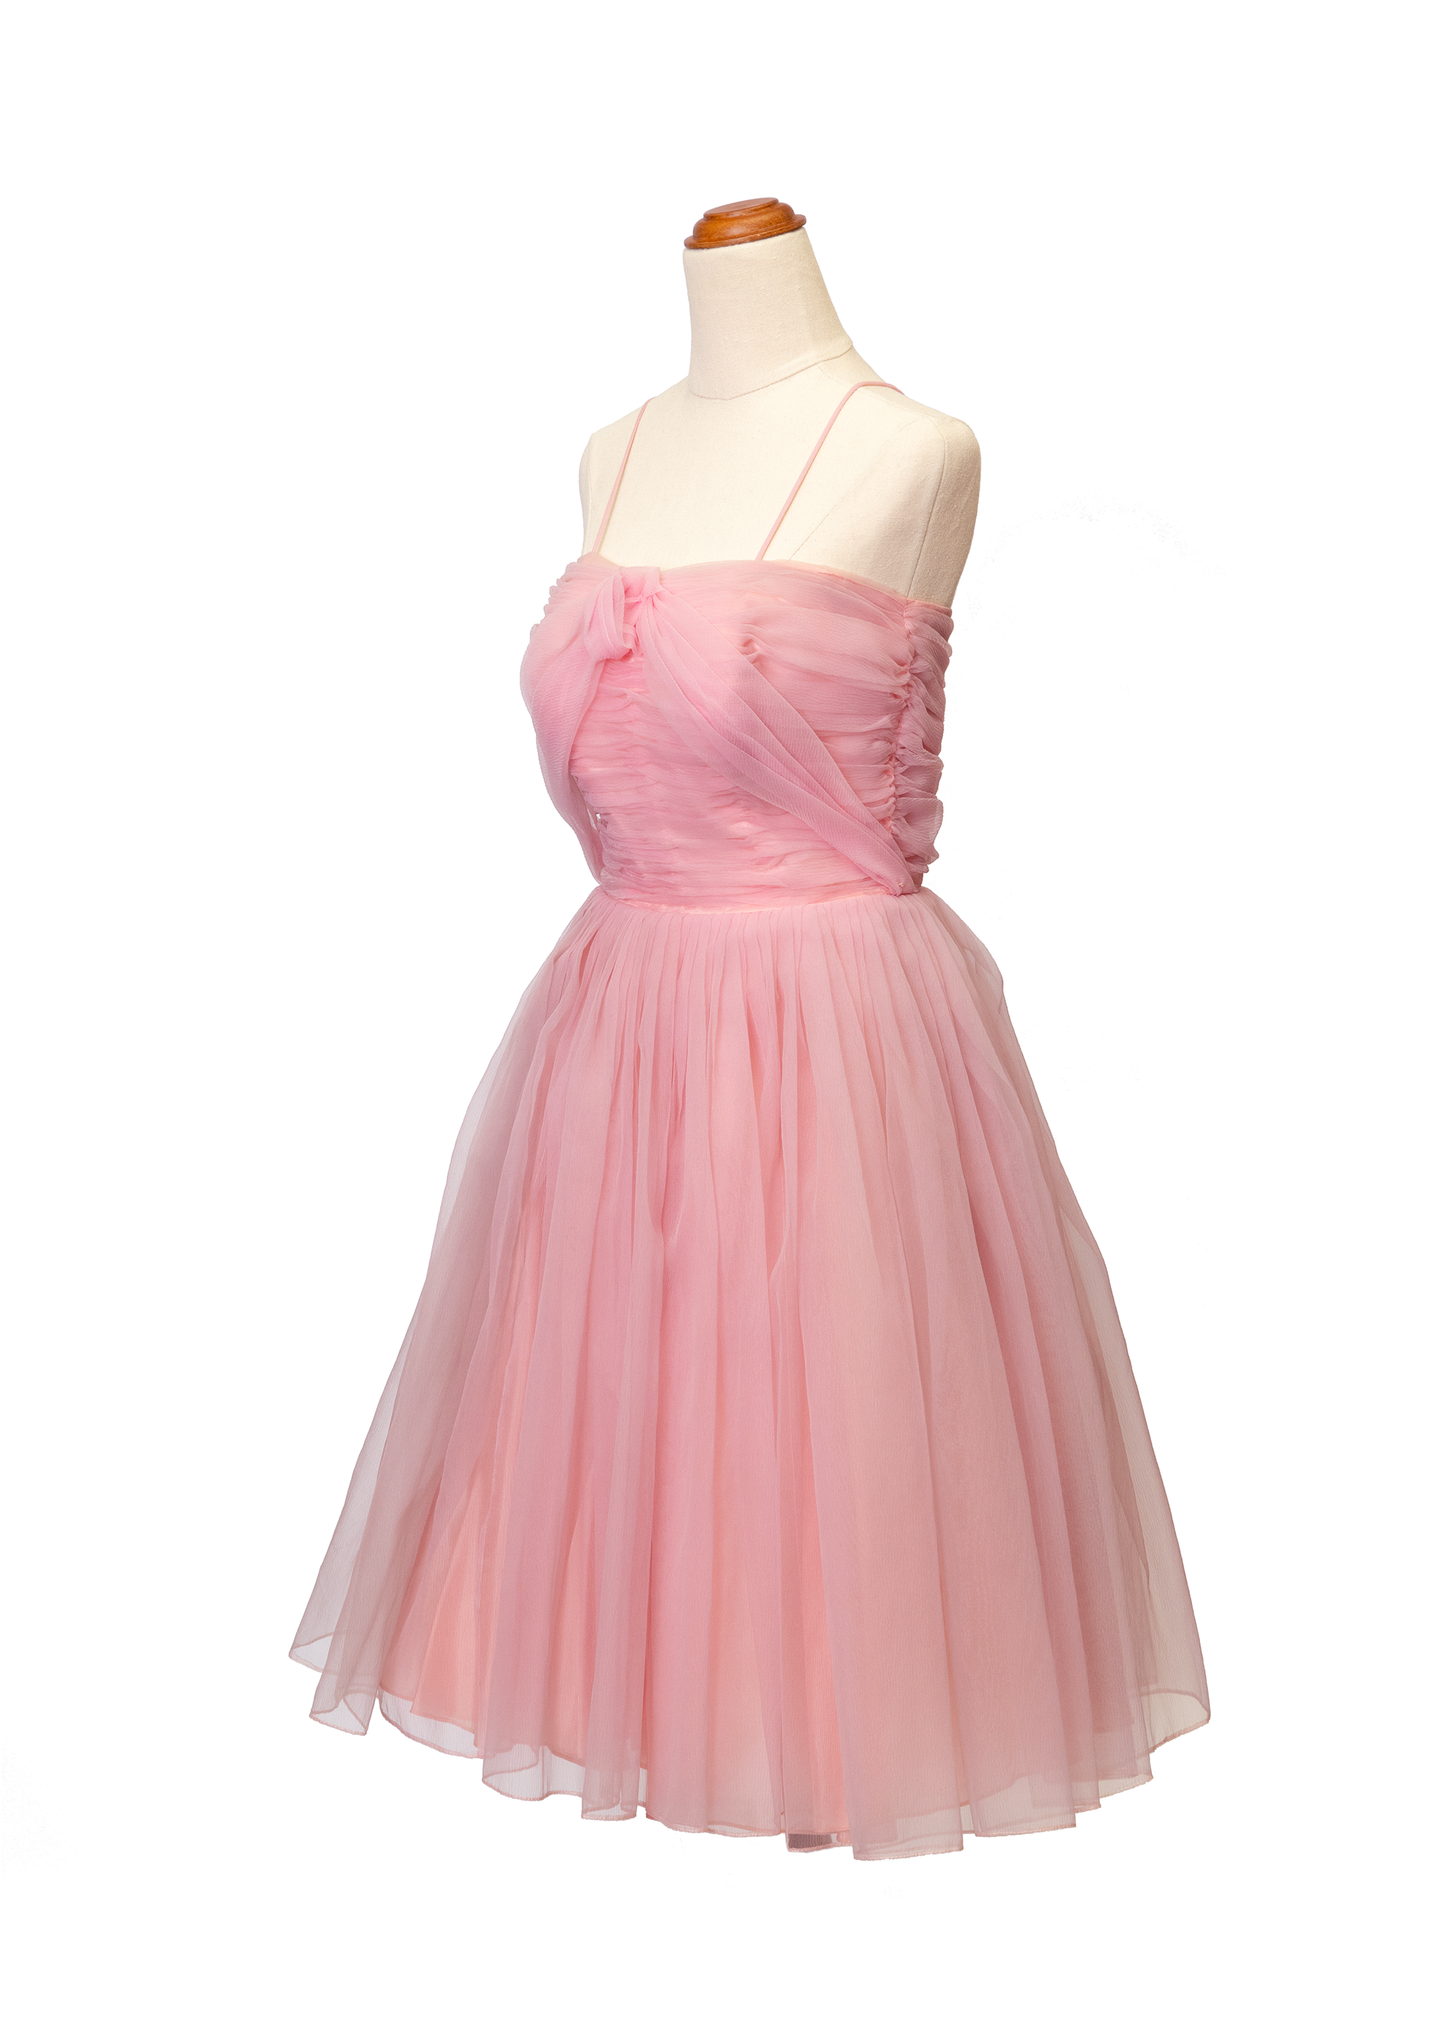 1950's Pink Fit and Flare Party Dress